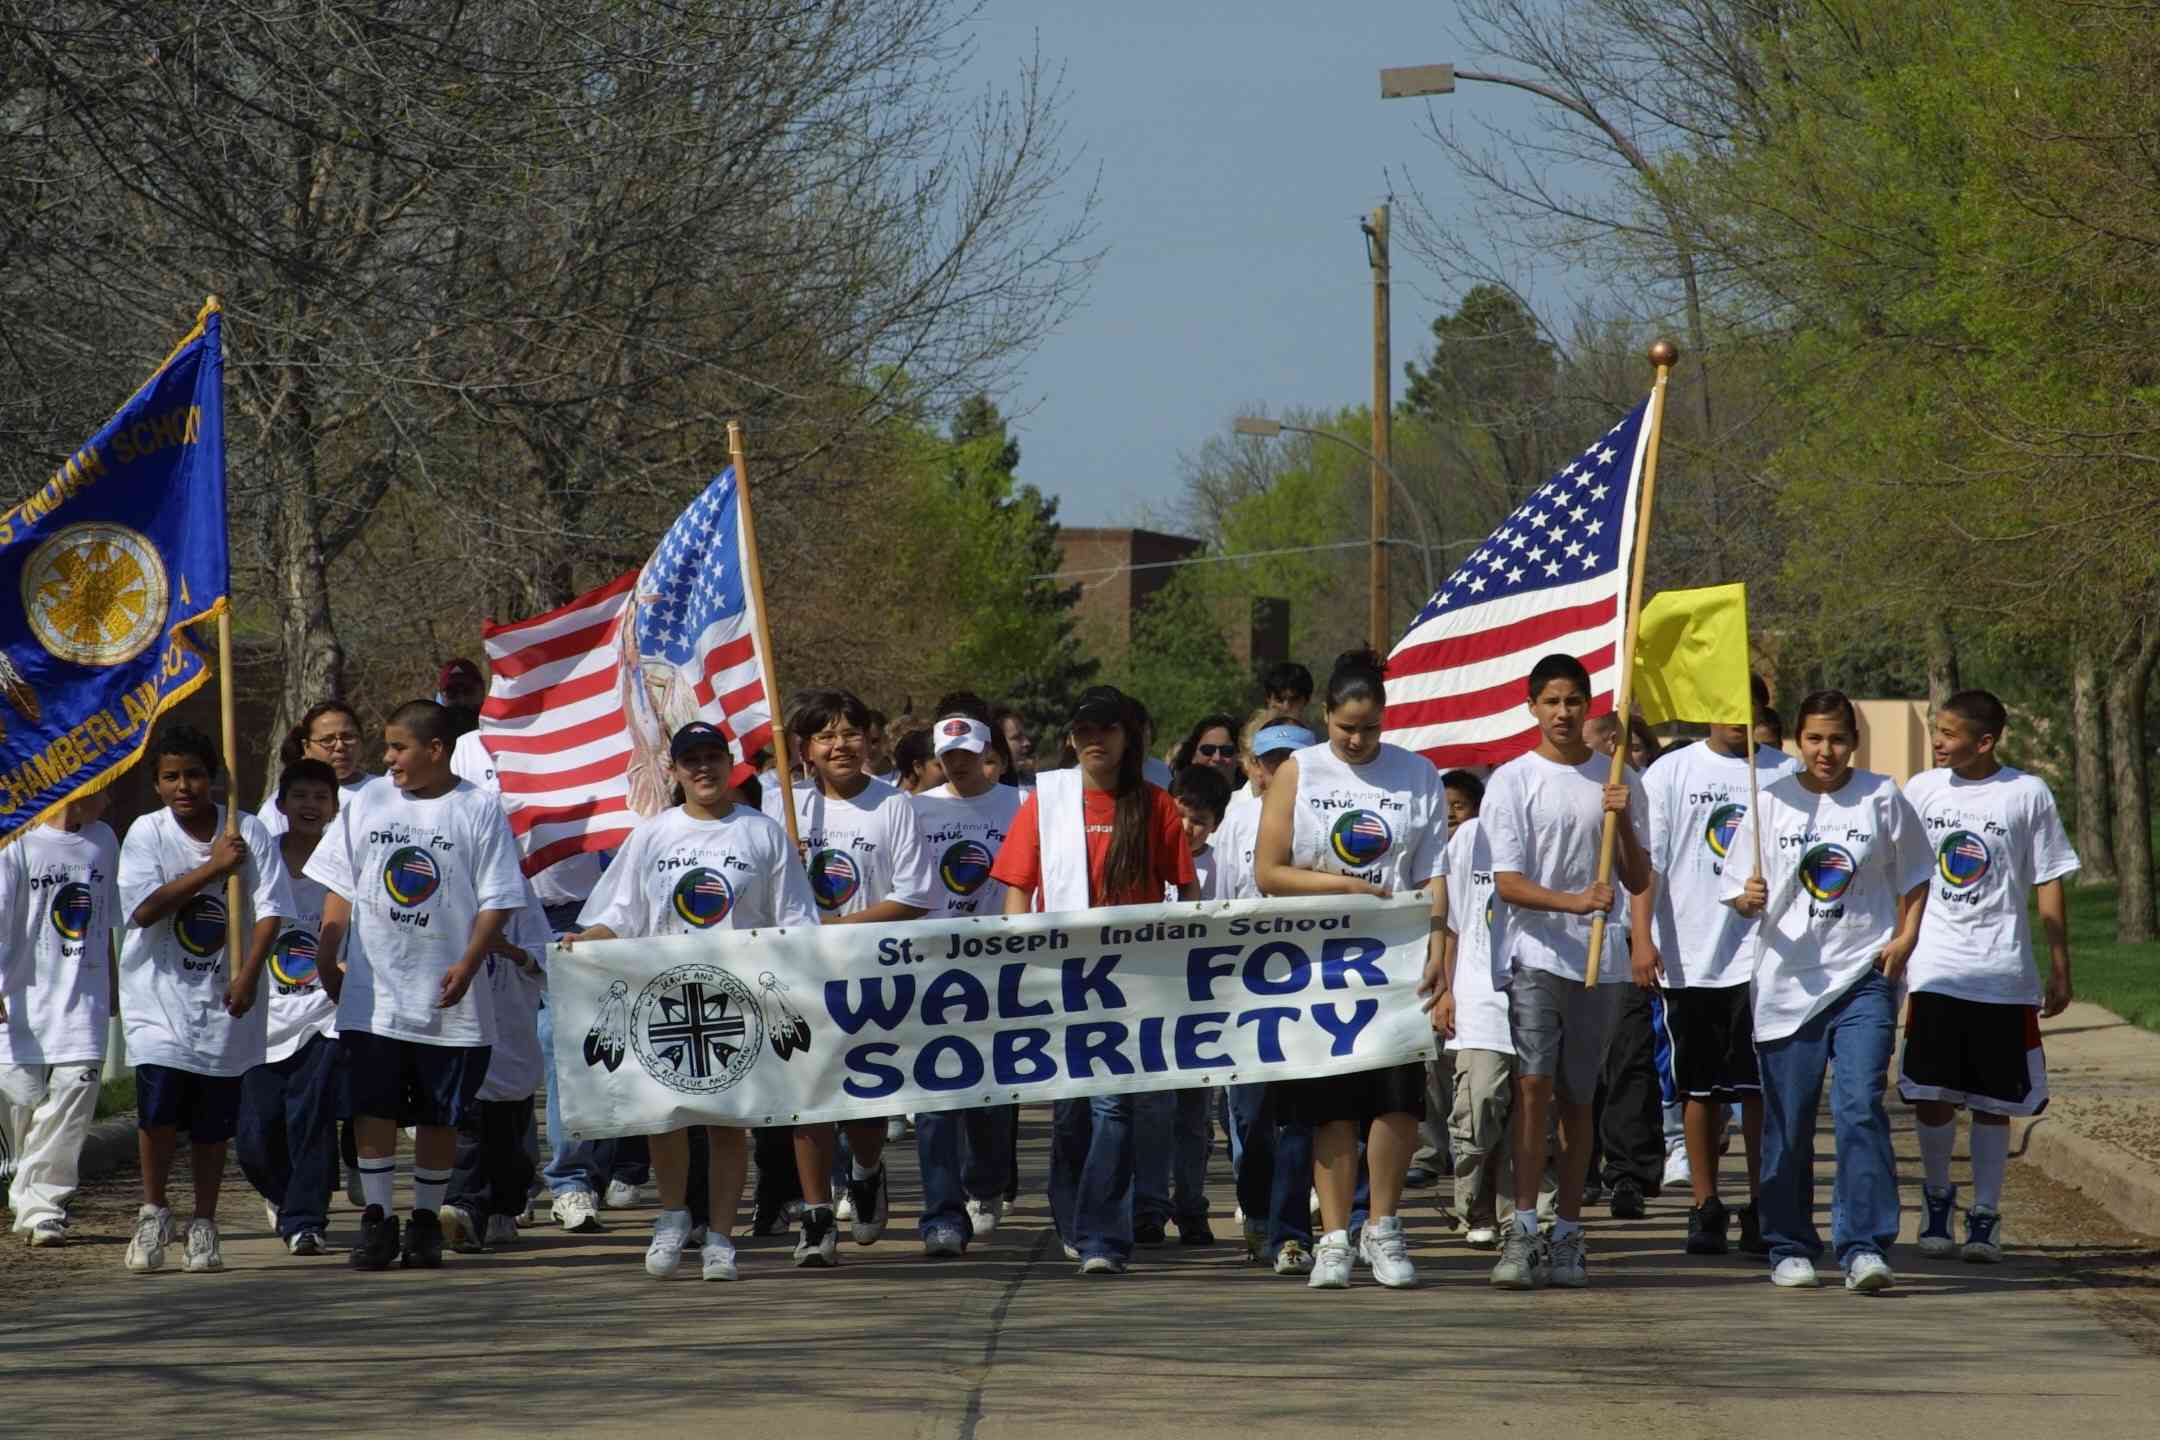 Last year’s spring Sobriety Walk at St. Joseph's Indian School.